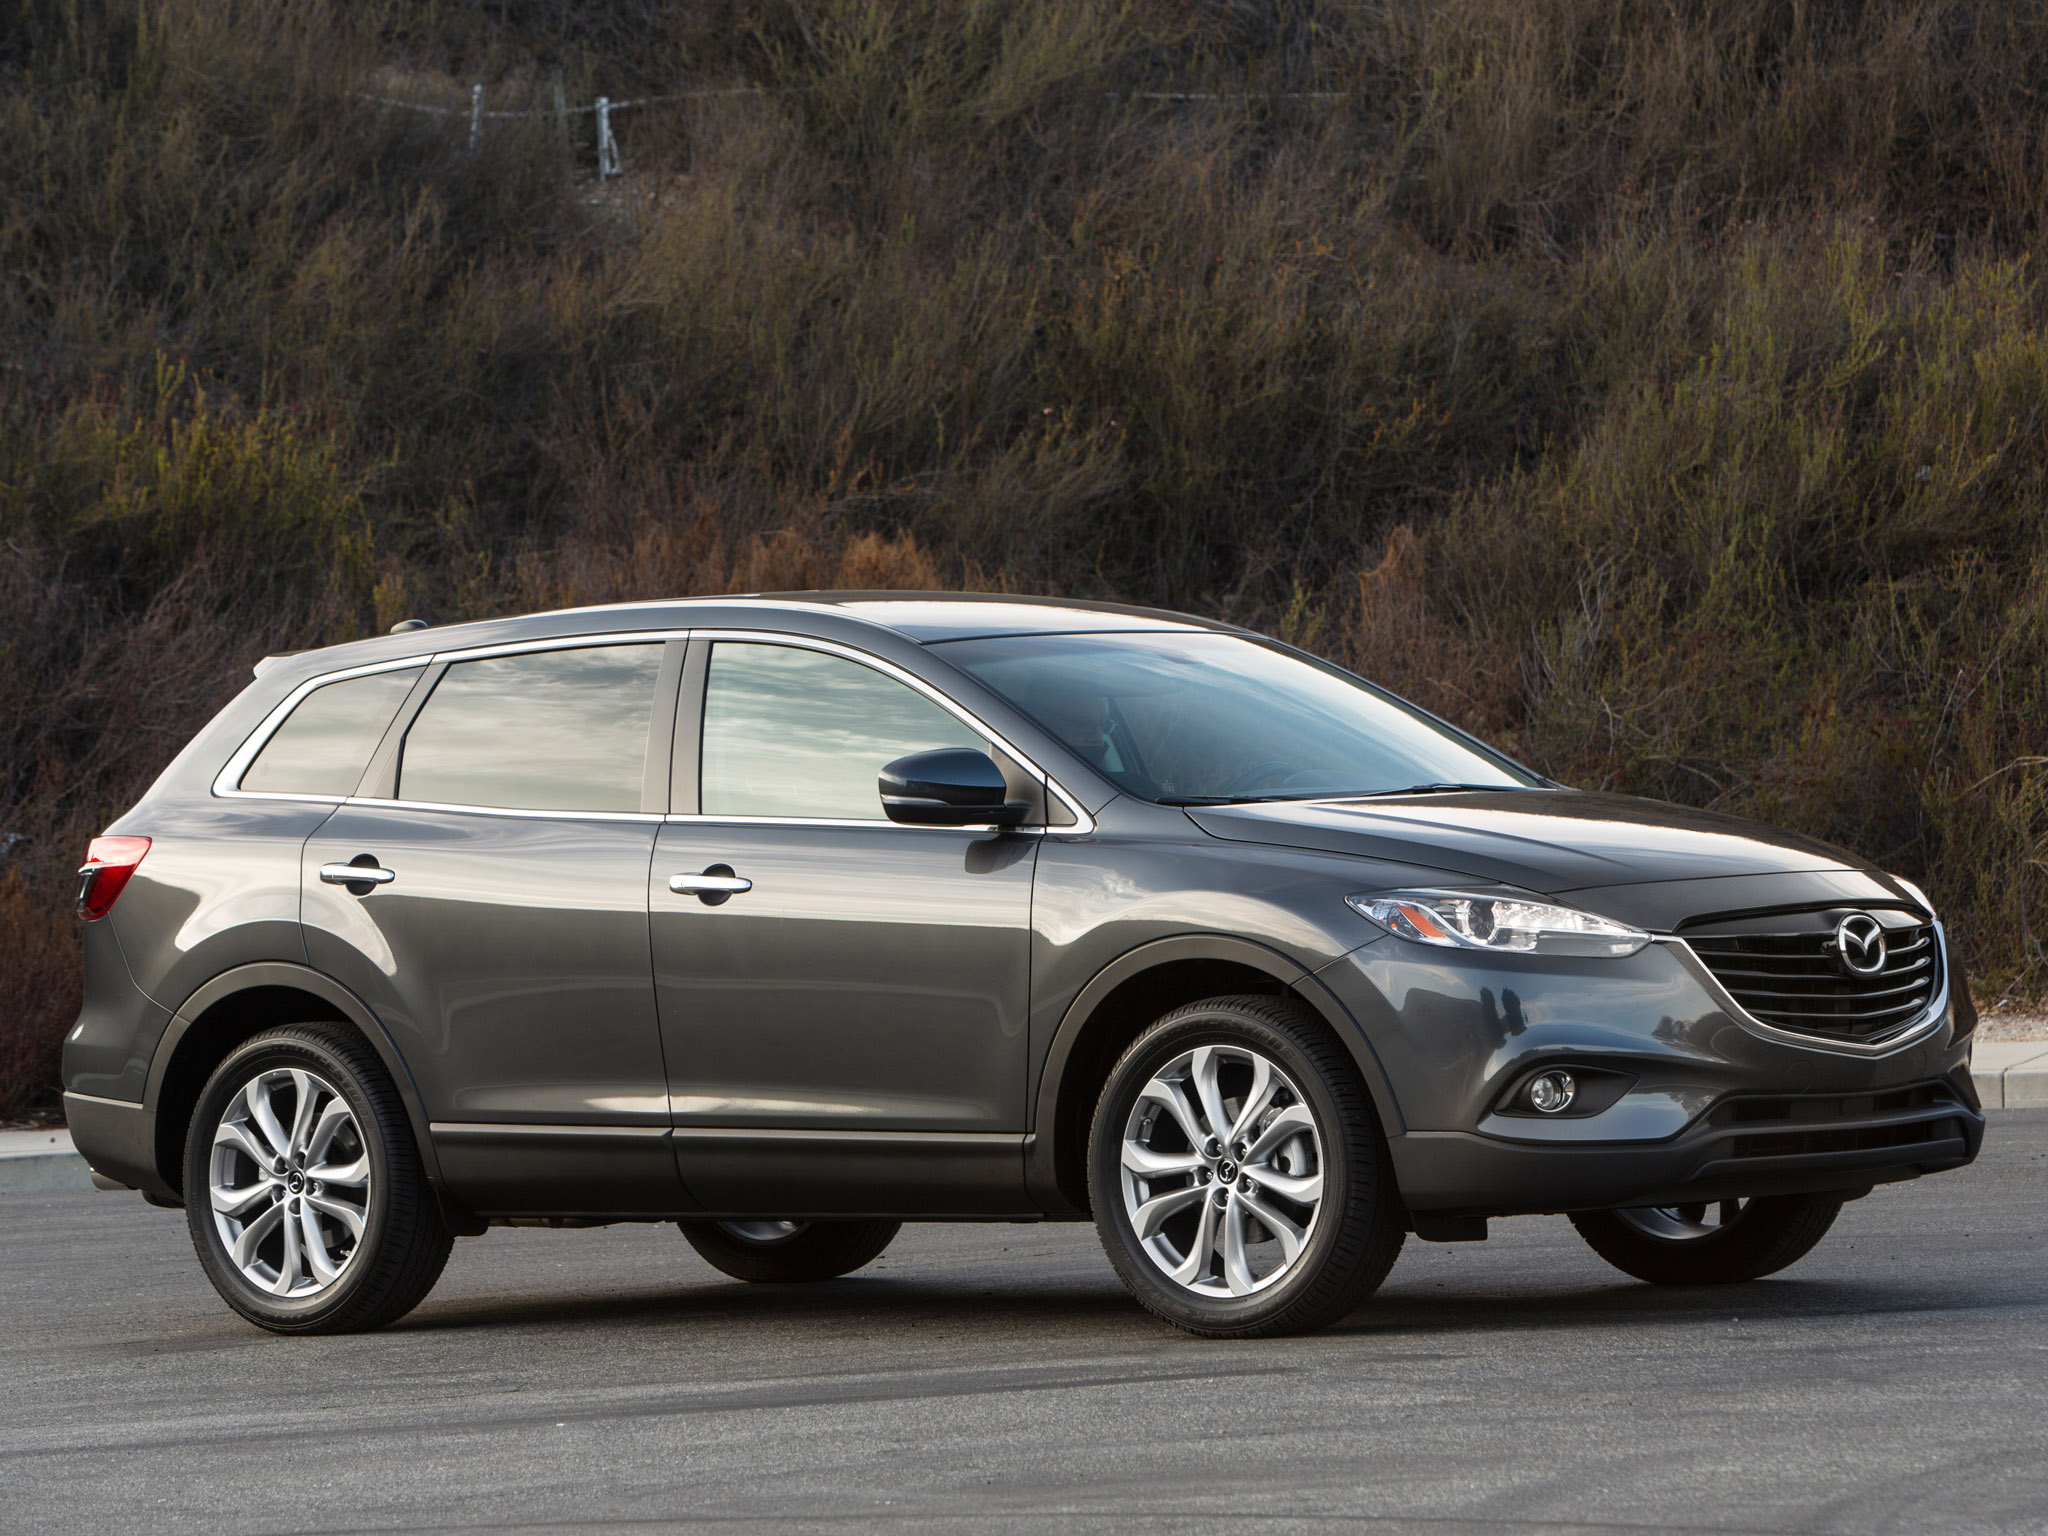 2014 Mazda Cx 9 Hd Pictures